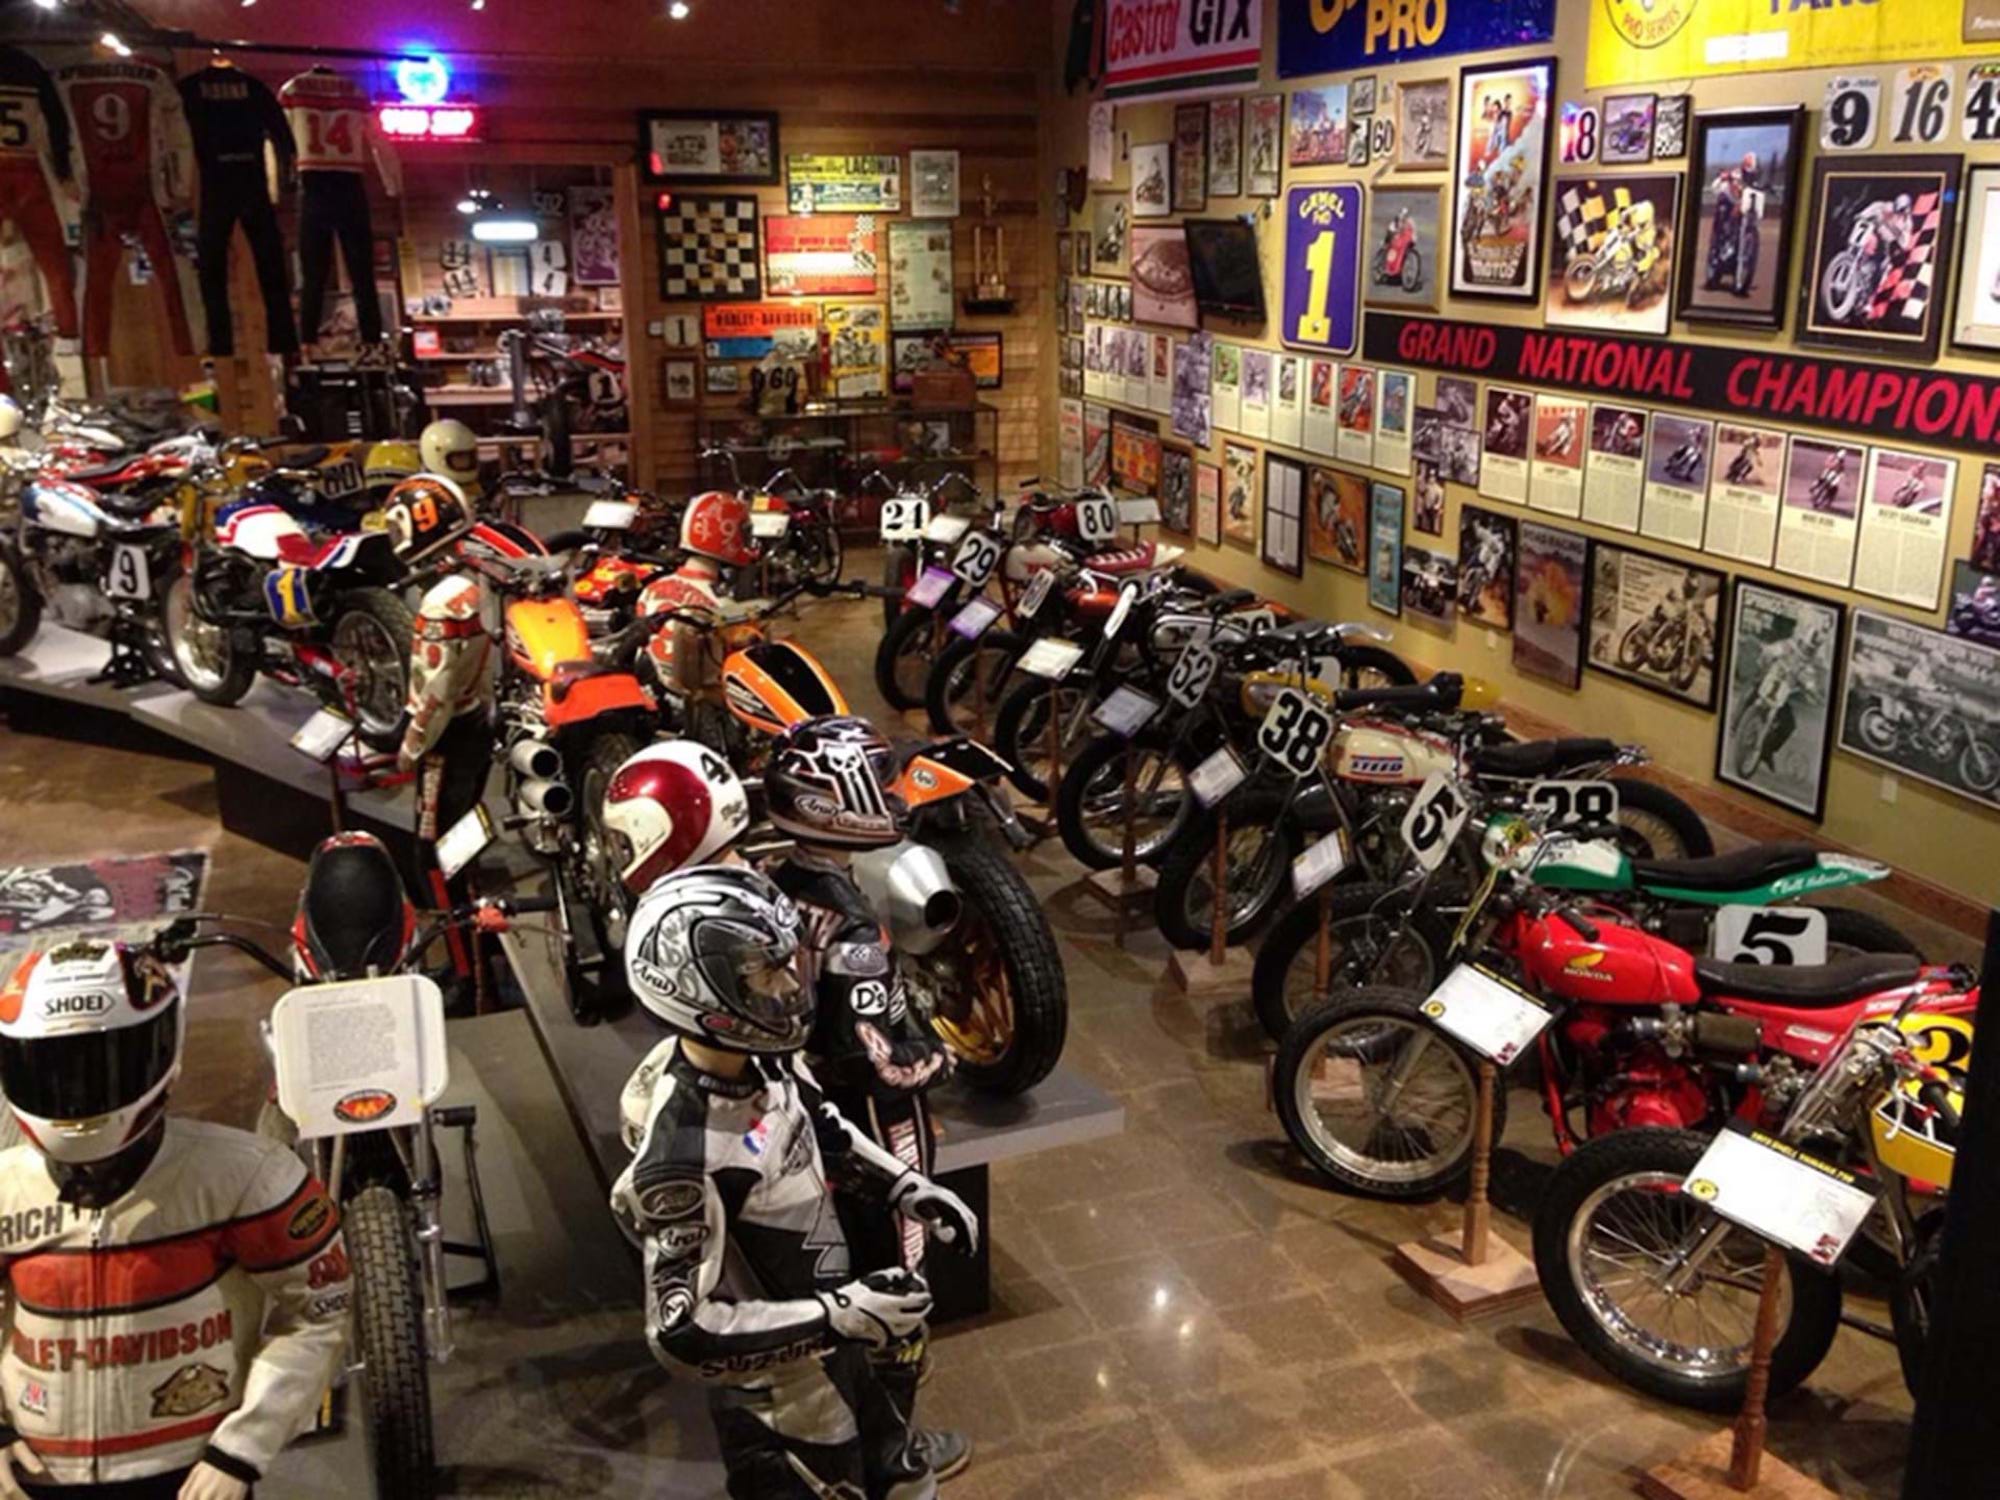 A view of the collections that were offered at Iowa's National Motorcycle Museum, which is offering “over 300 collector-grade motorcycles and over 1,000 lots of road art" to Mecum's chop block. Media sourced from the NMM.